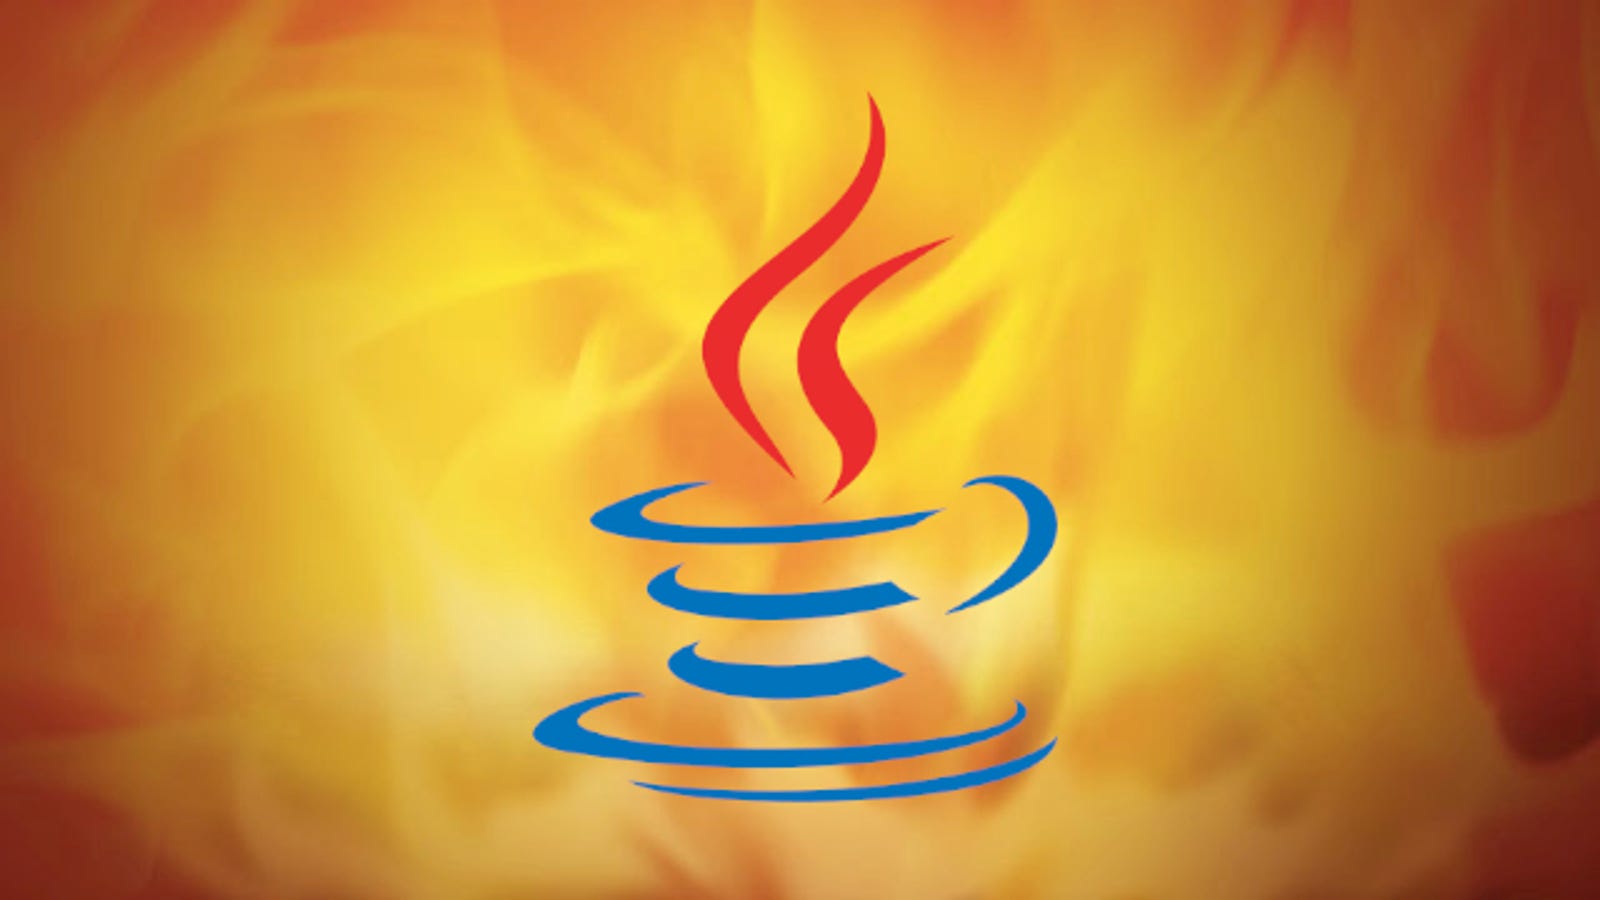 What Is Java, Is It Insecure, and Should I Use It?